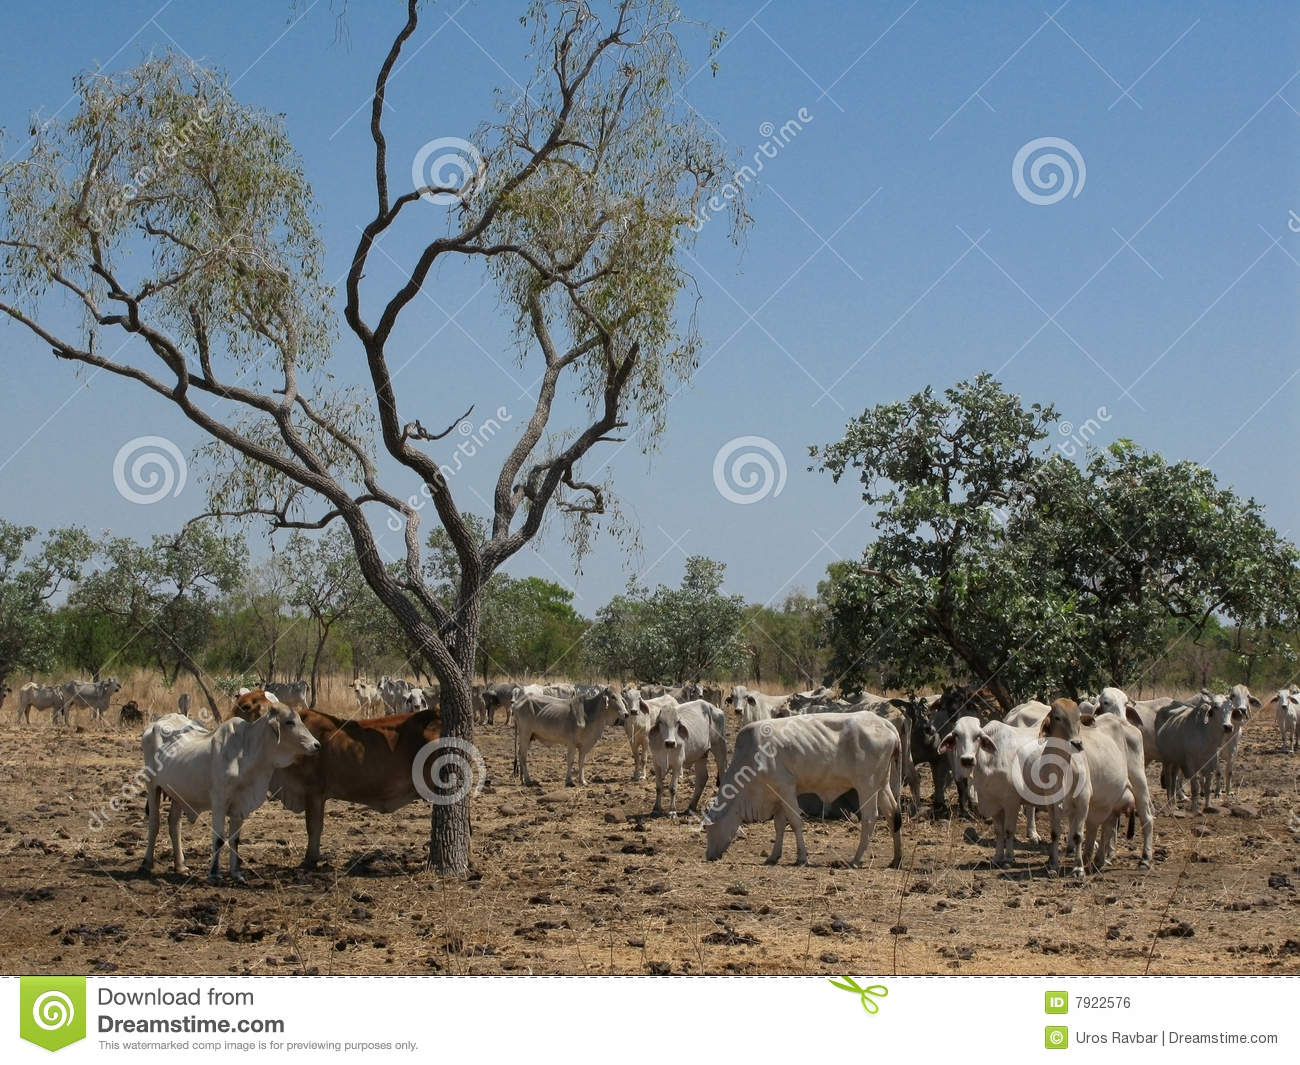 Herd Of Cattle Grazing On Aridly Land With Dry Grass And Shrubby